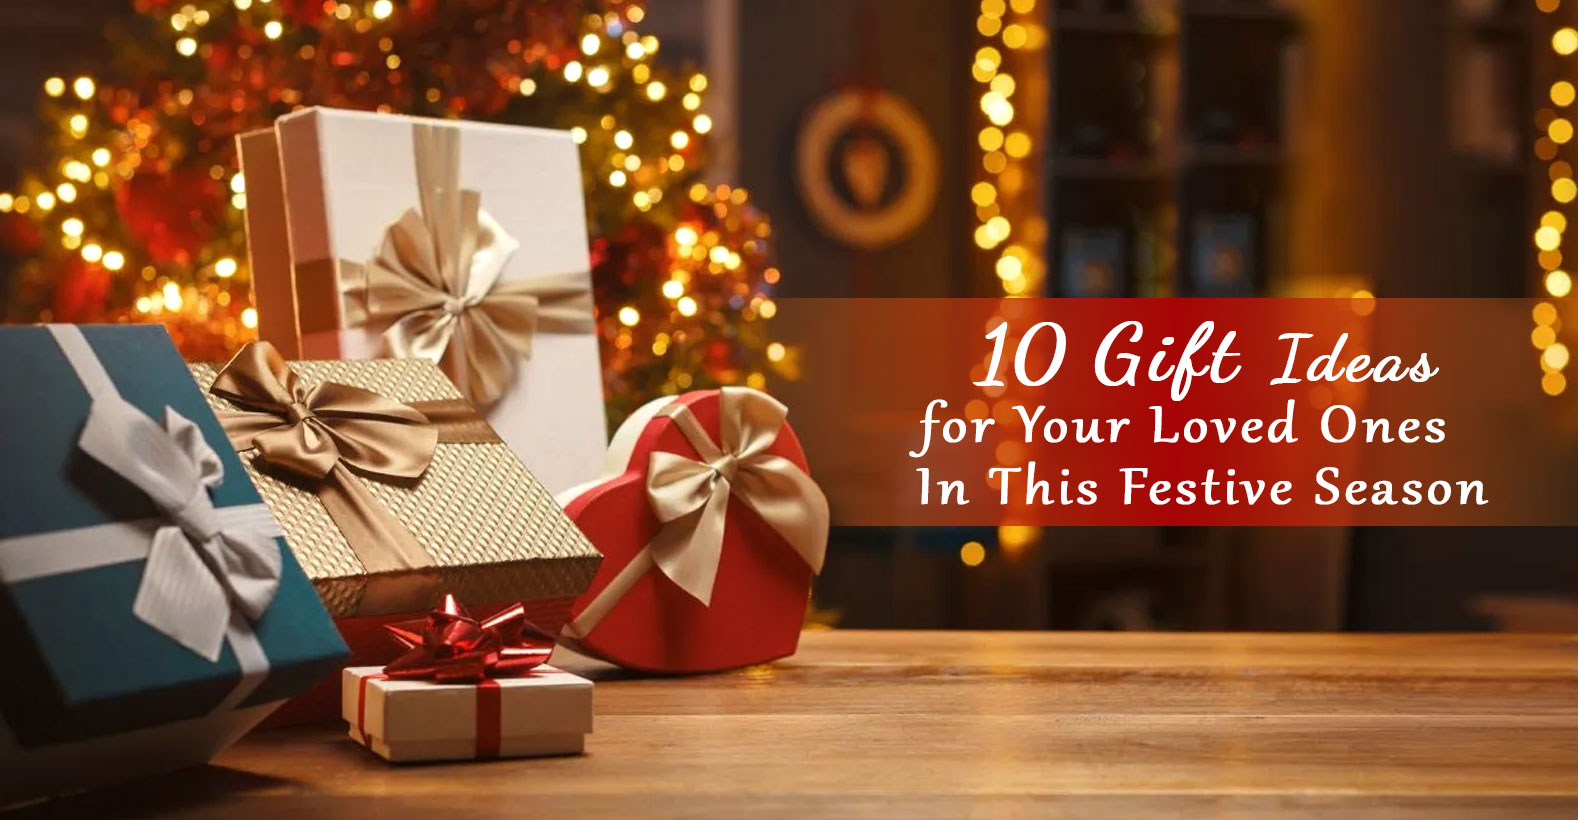 Gift Ideas For Your Loved Ones This Festive Season